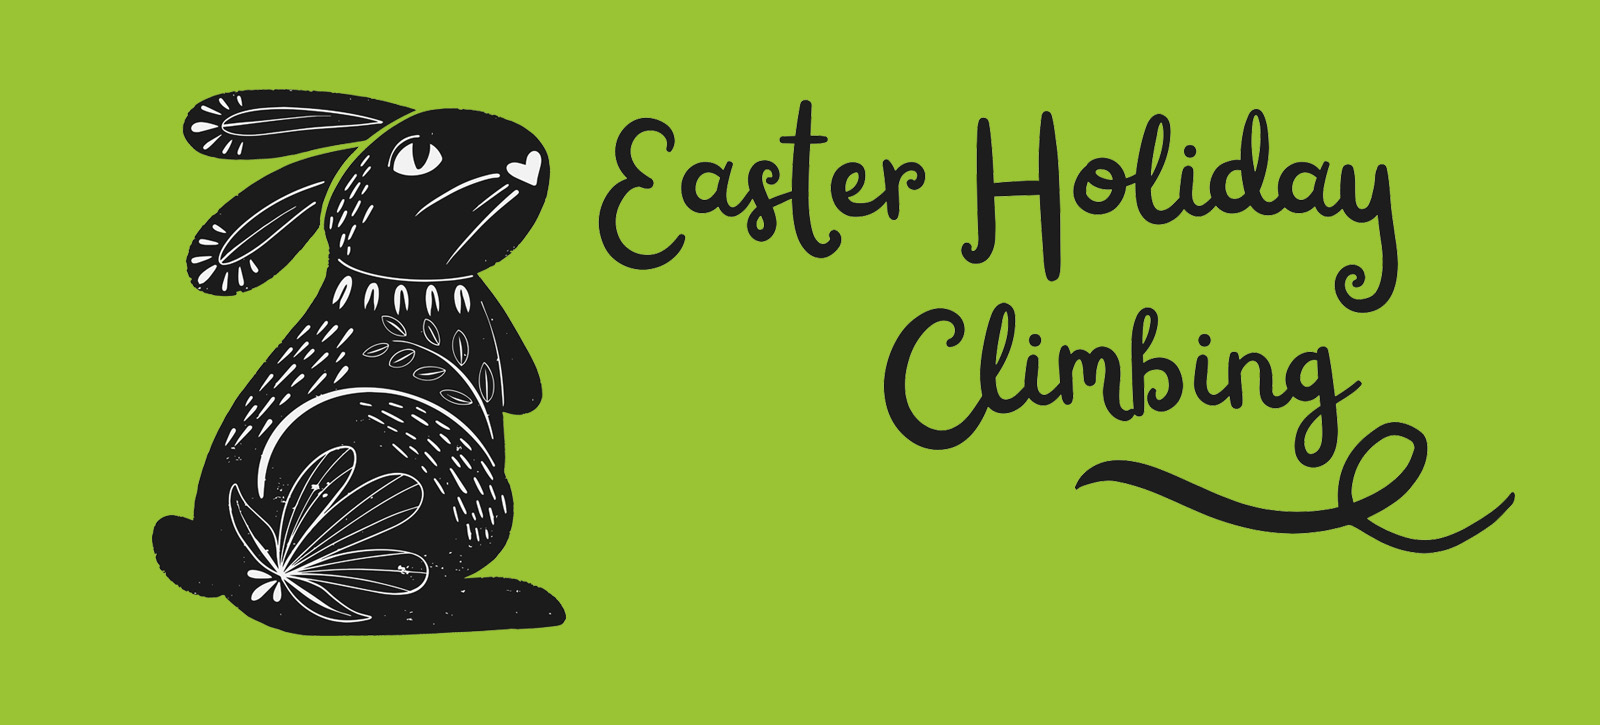 Easter Holiday Climbing graphic